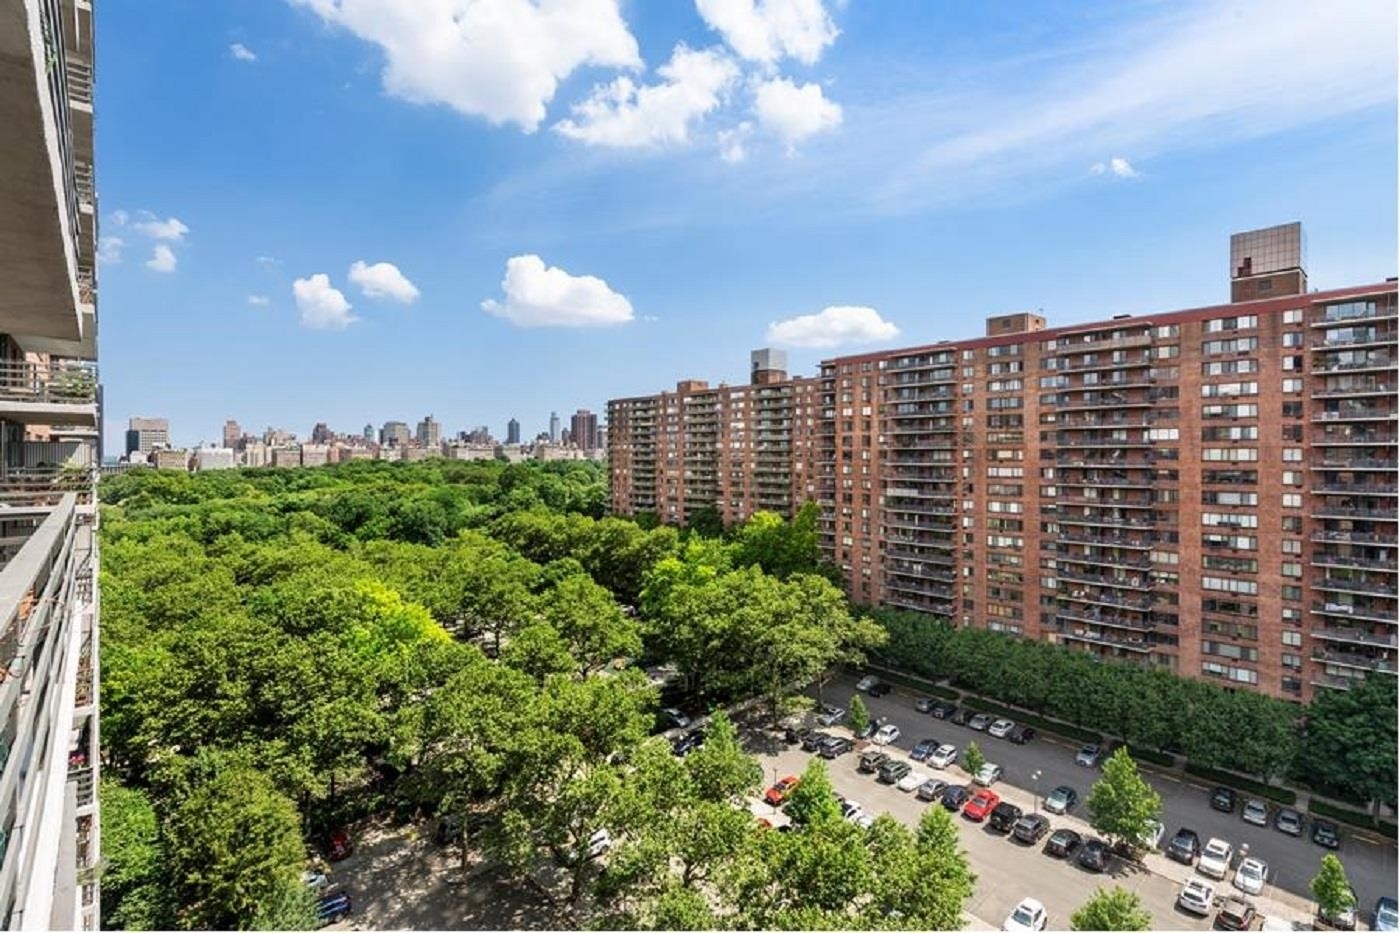 Condominium for Sale at Cpw Towers, 392 CENTRAL PARK W, 8Y Manhattan Valley, New York, New York 10025